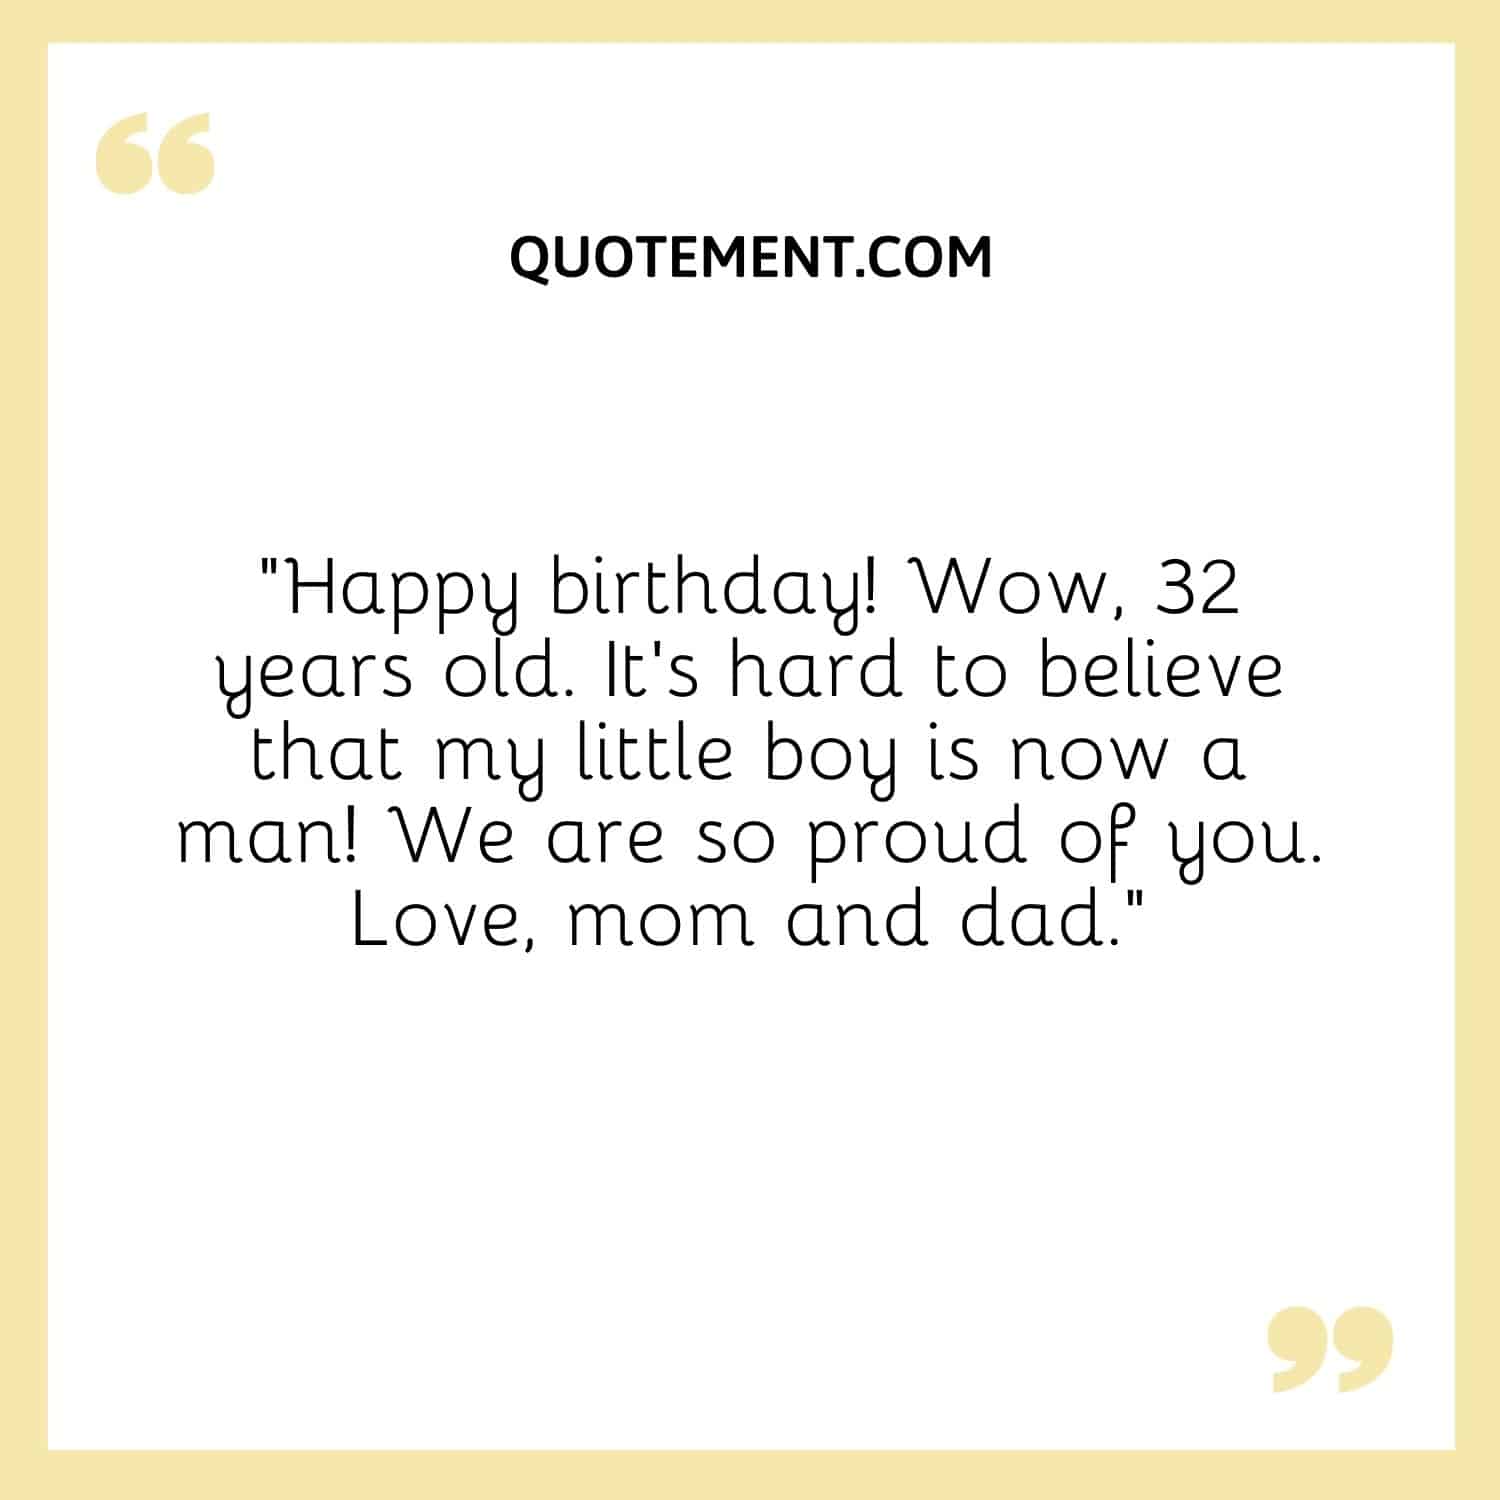 “Happy birthday! Wow, 32 years old. It’s hard to believe that my little boy is now a man! We are so proud of you. Love, mom and dad.”